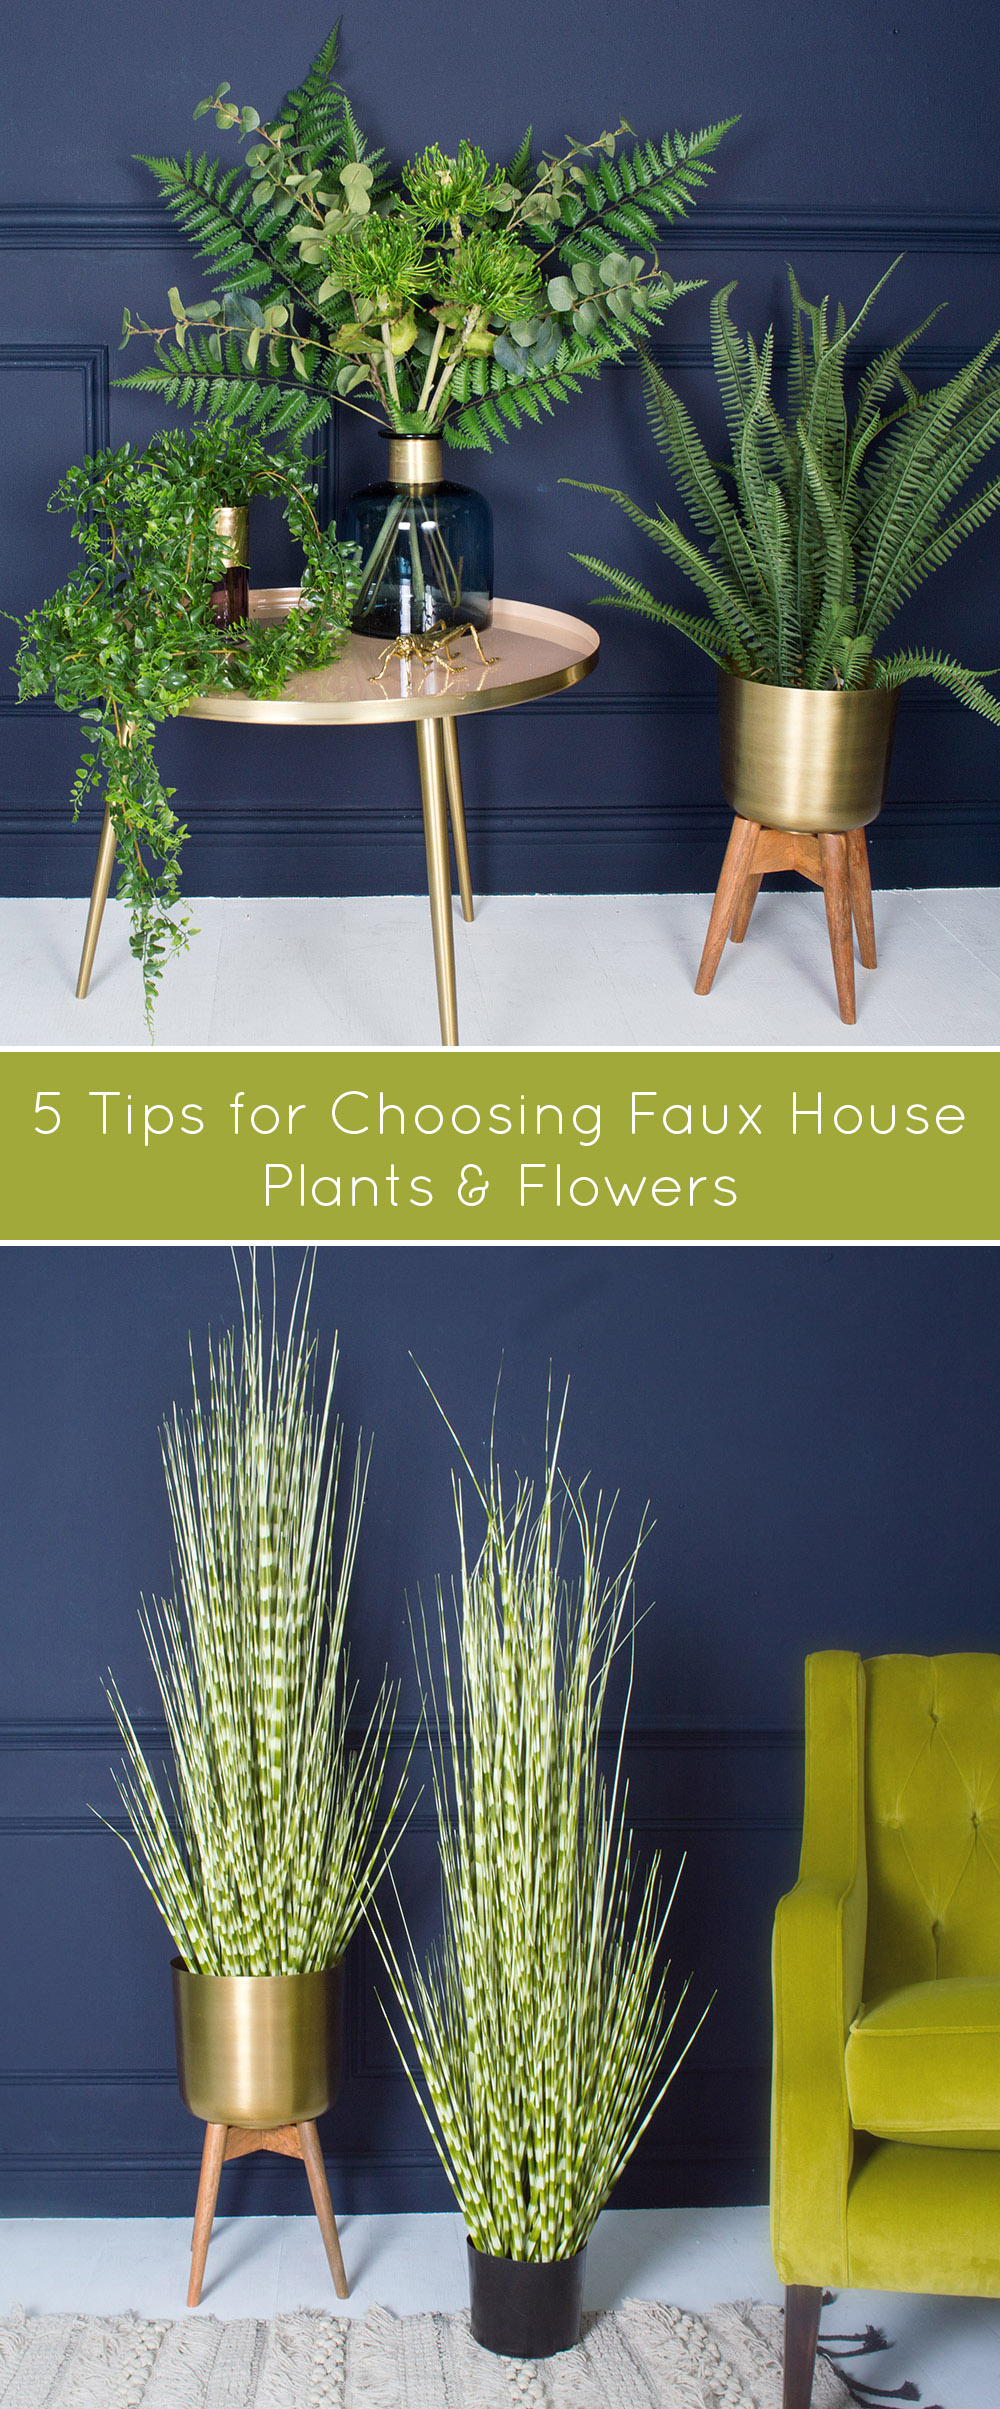 Real house plants and flowers take so much TLC, which we don’t all have the patience for! So, if you want to simplify your life, here are my 5 tips for choosing faux house plants and flowers for an on going fabulous display.